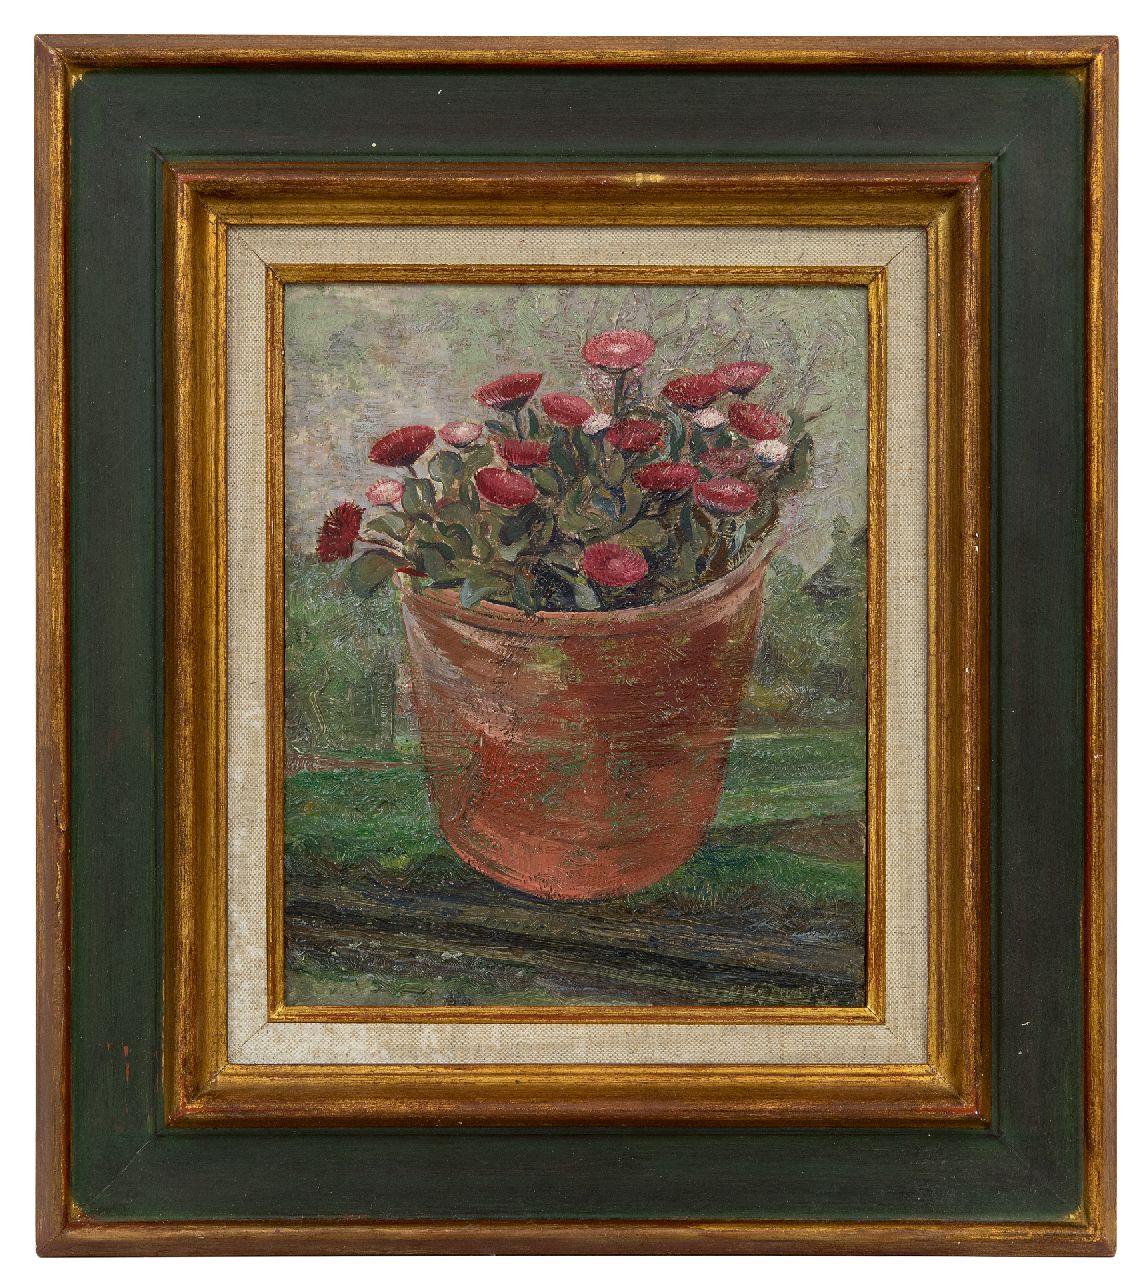 Zweep D.J. van der | 'Douwe' Jan van der Zweep | Paintings offered for sale | Flowerpot with daisies, oil on panel 27.0 x 21.1 cm, signed l.r.